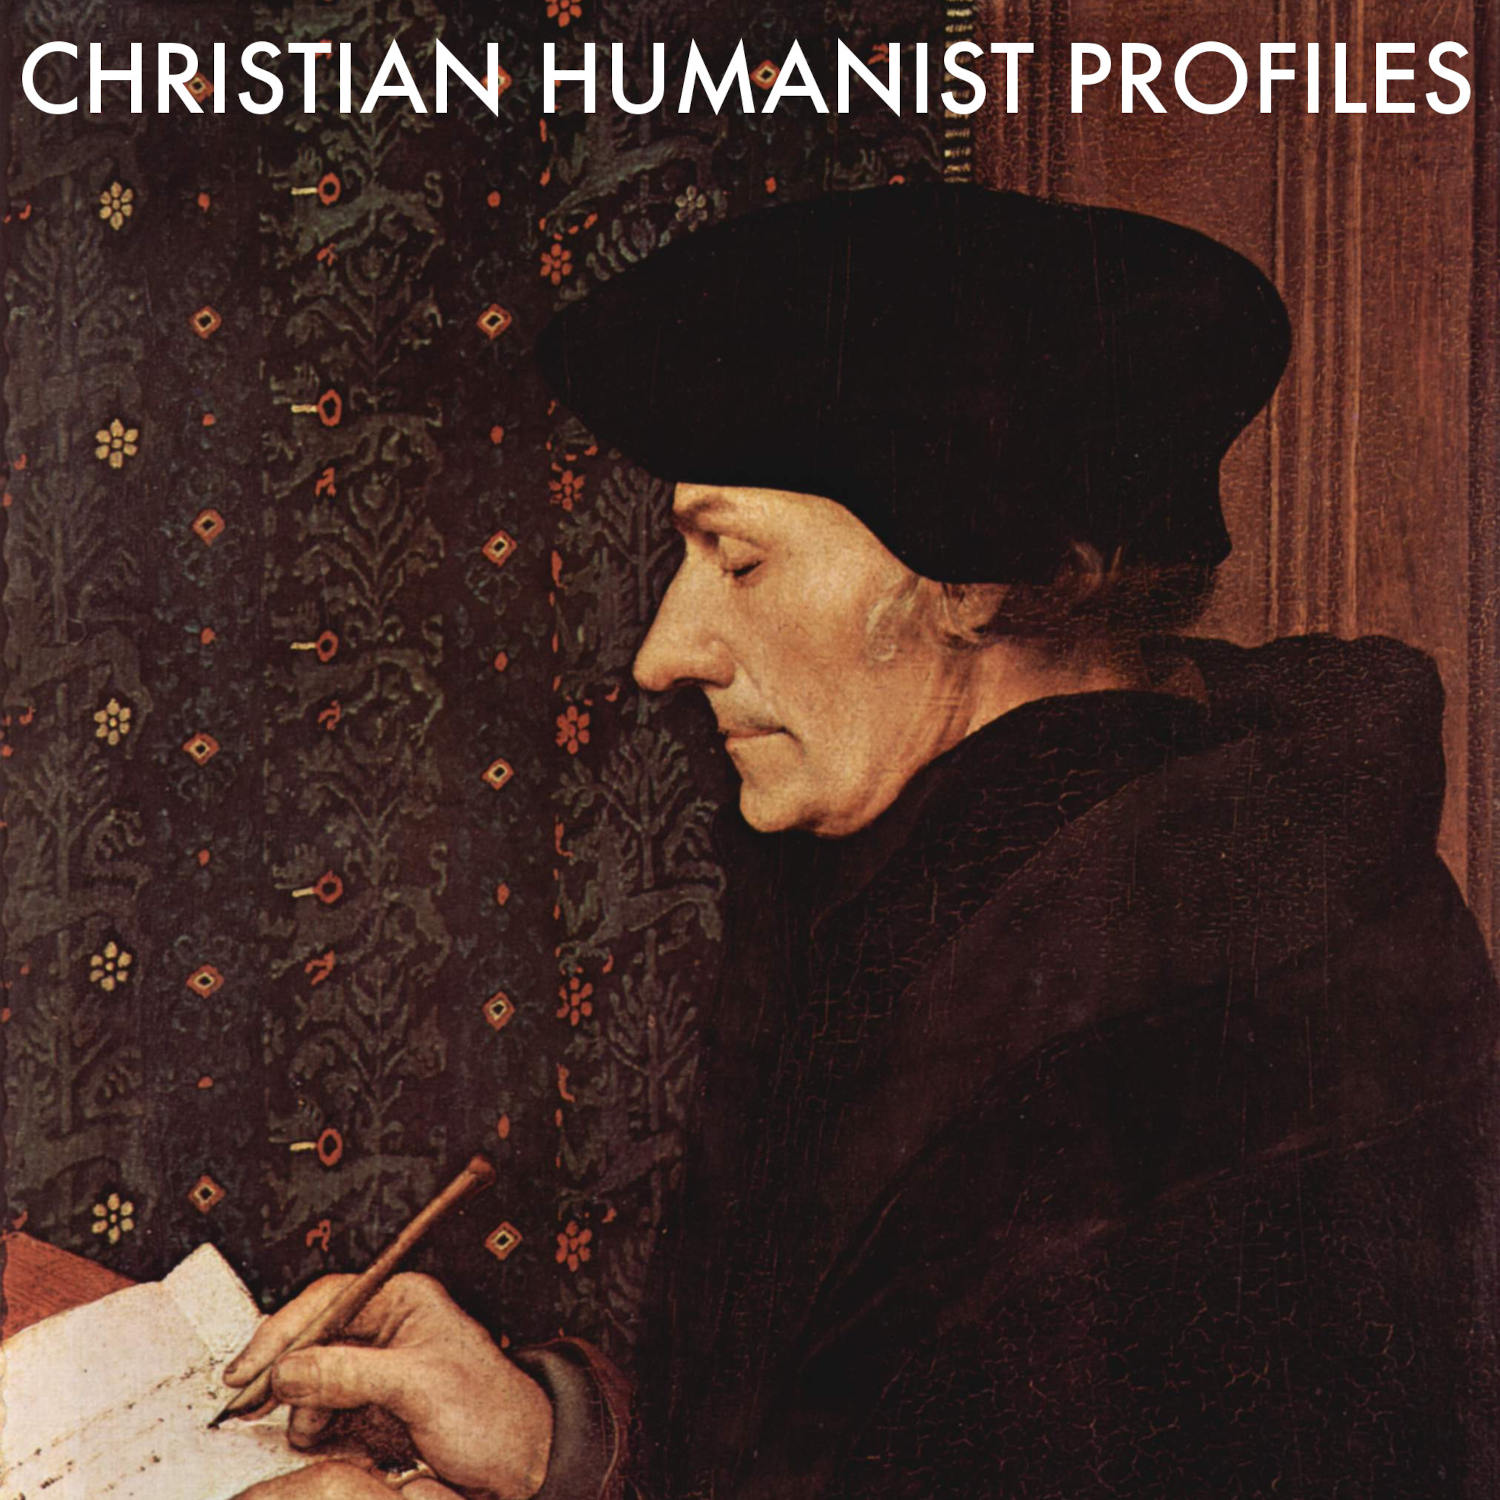 Christian Humanist Profiles 49: Beyond the Abortion Wars